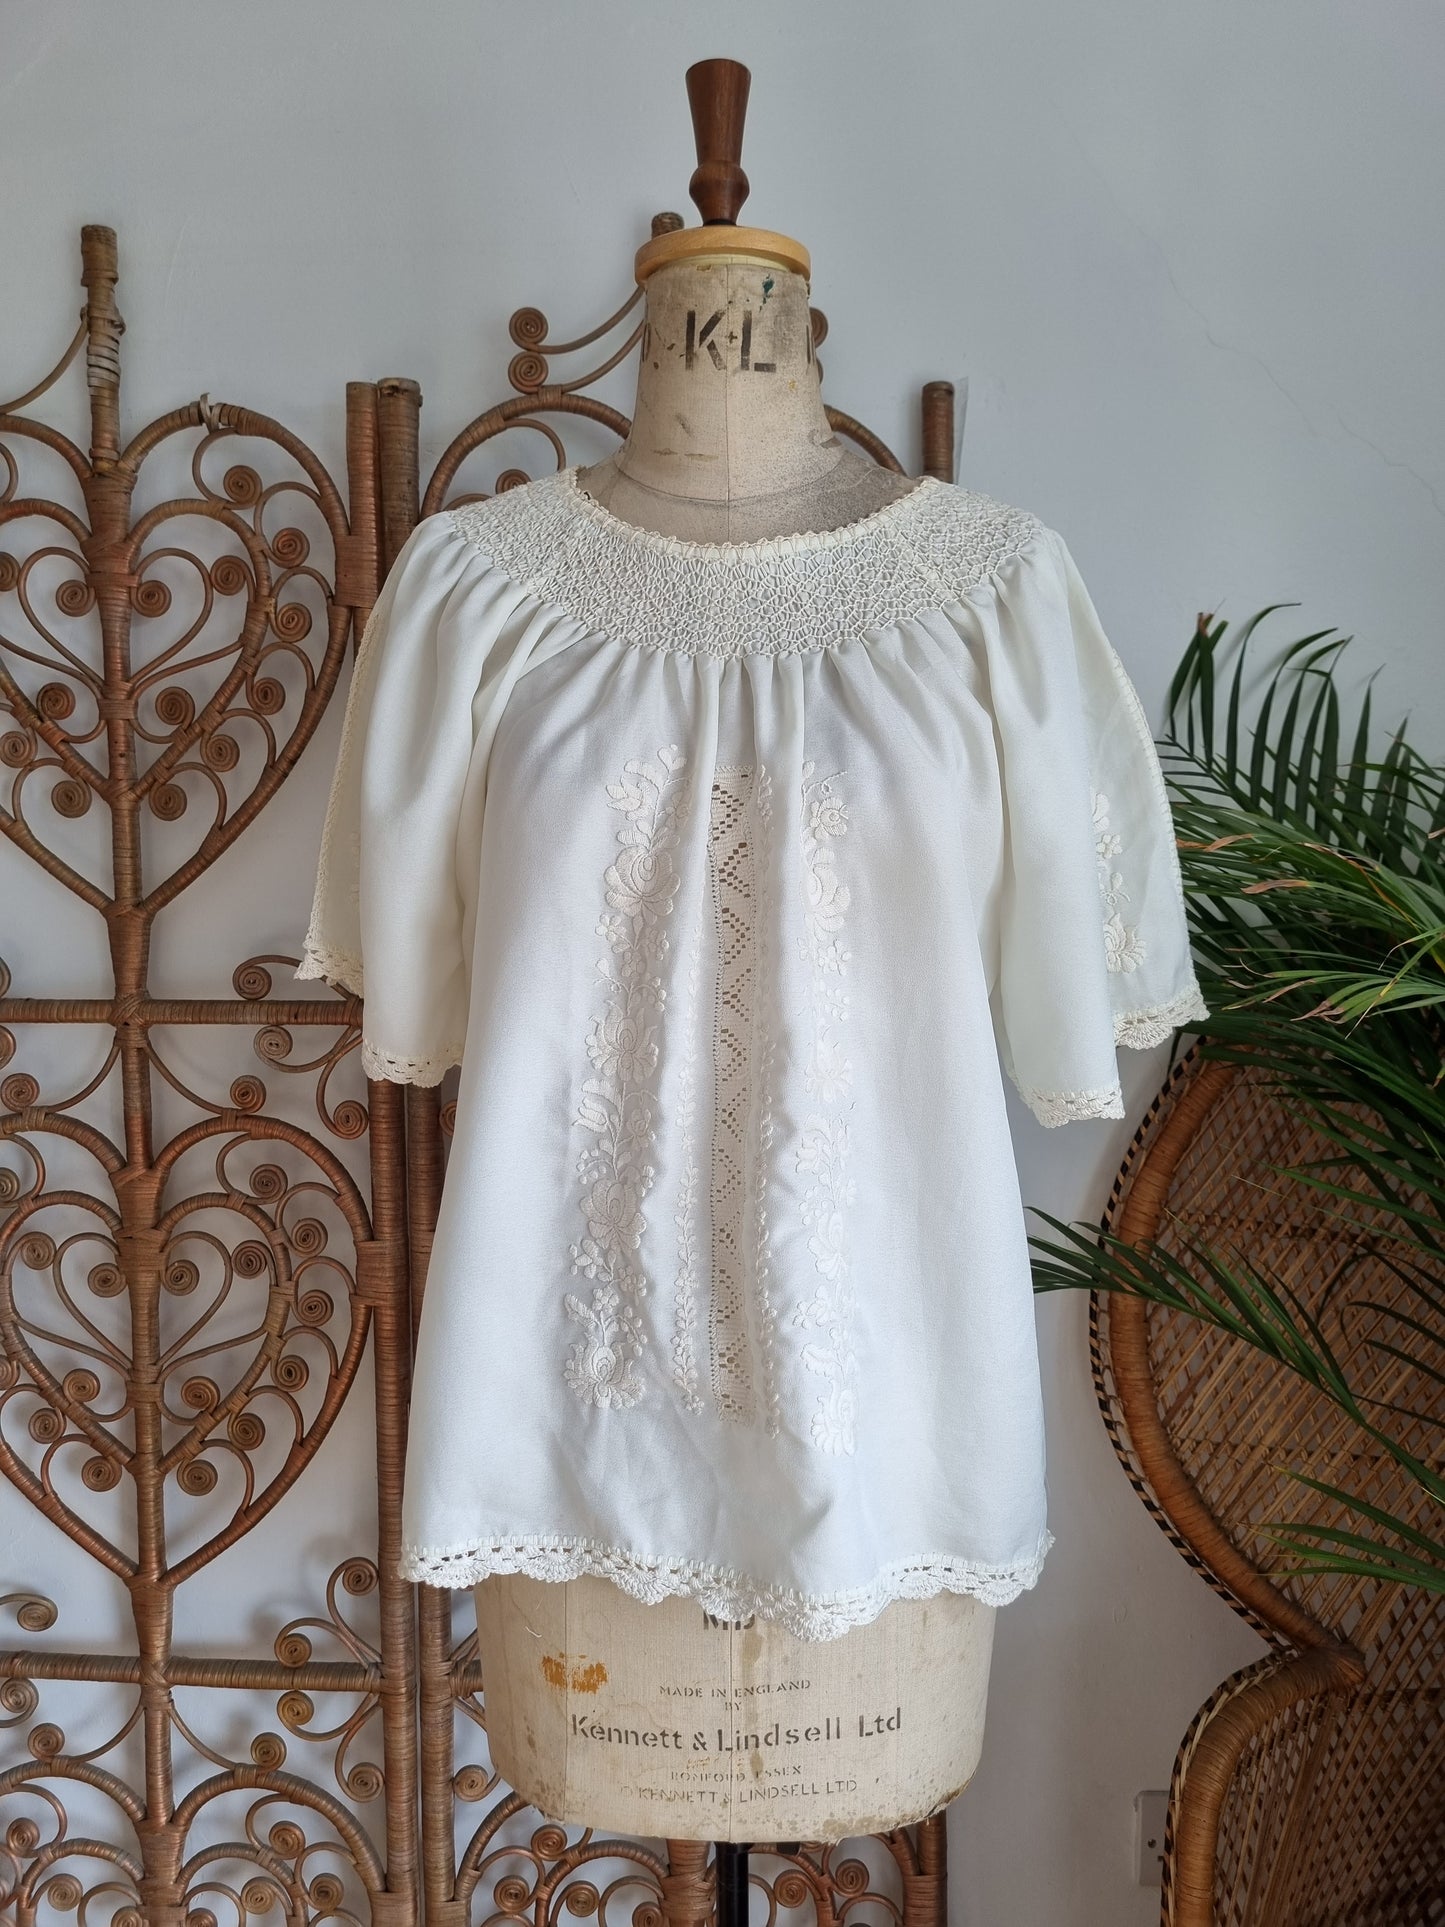 Vintage embroidered blouse